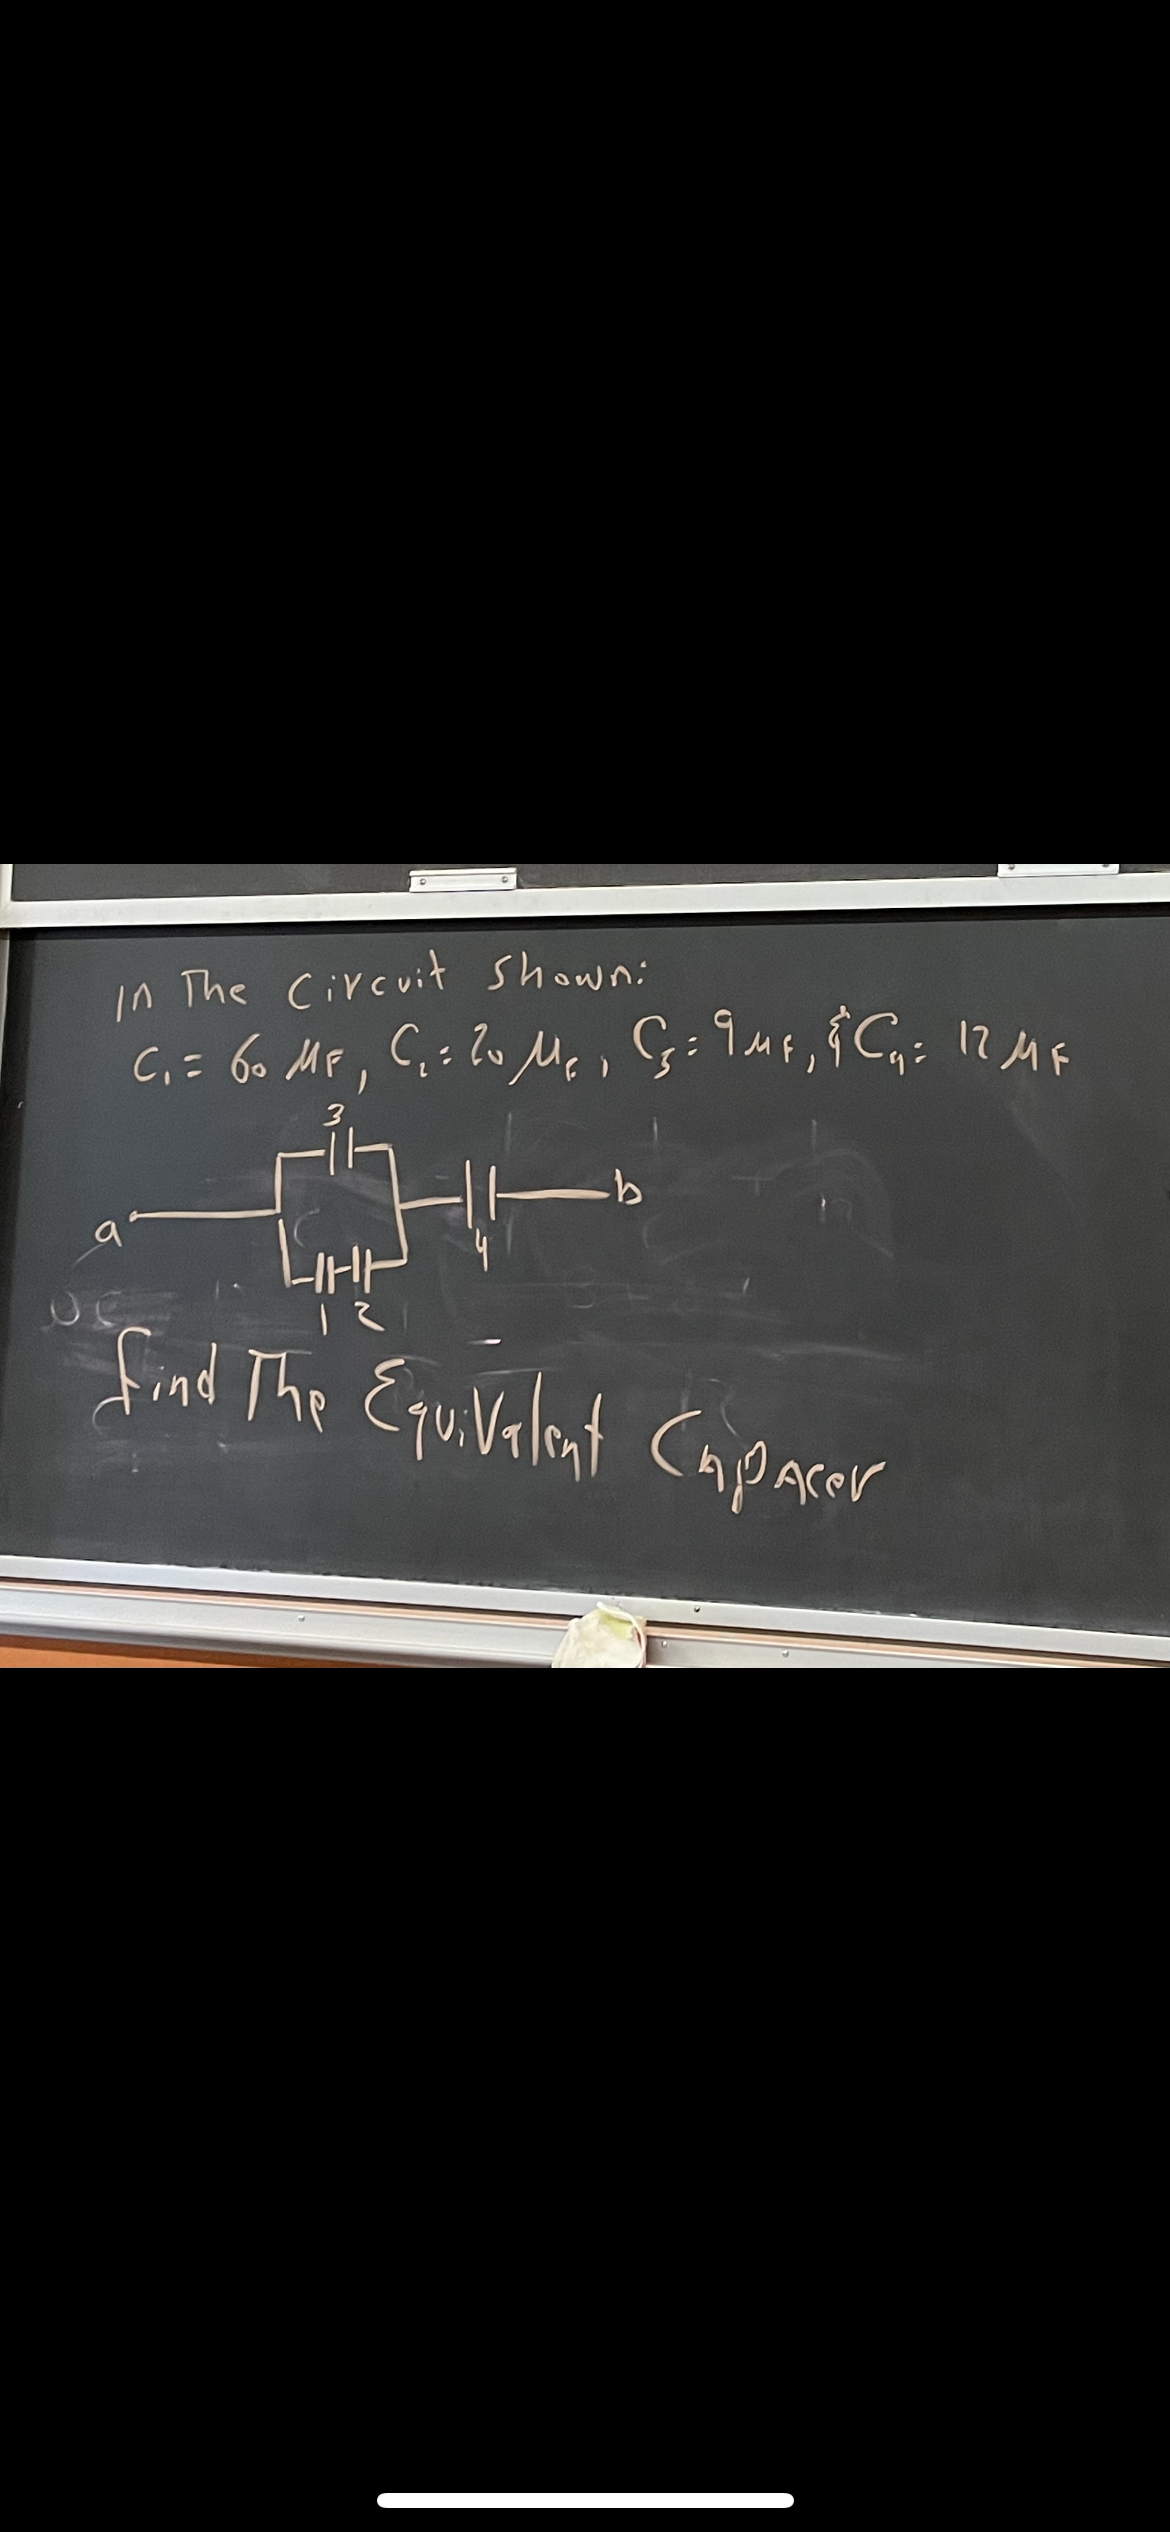 in The Circuit shown:
C,= 60 MF,
12 MF
a
find The Equivalont Capacar
